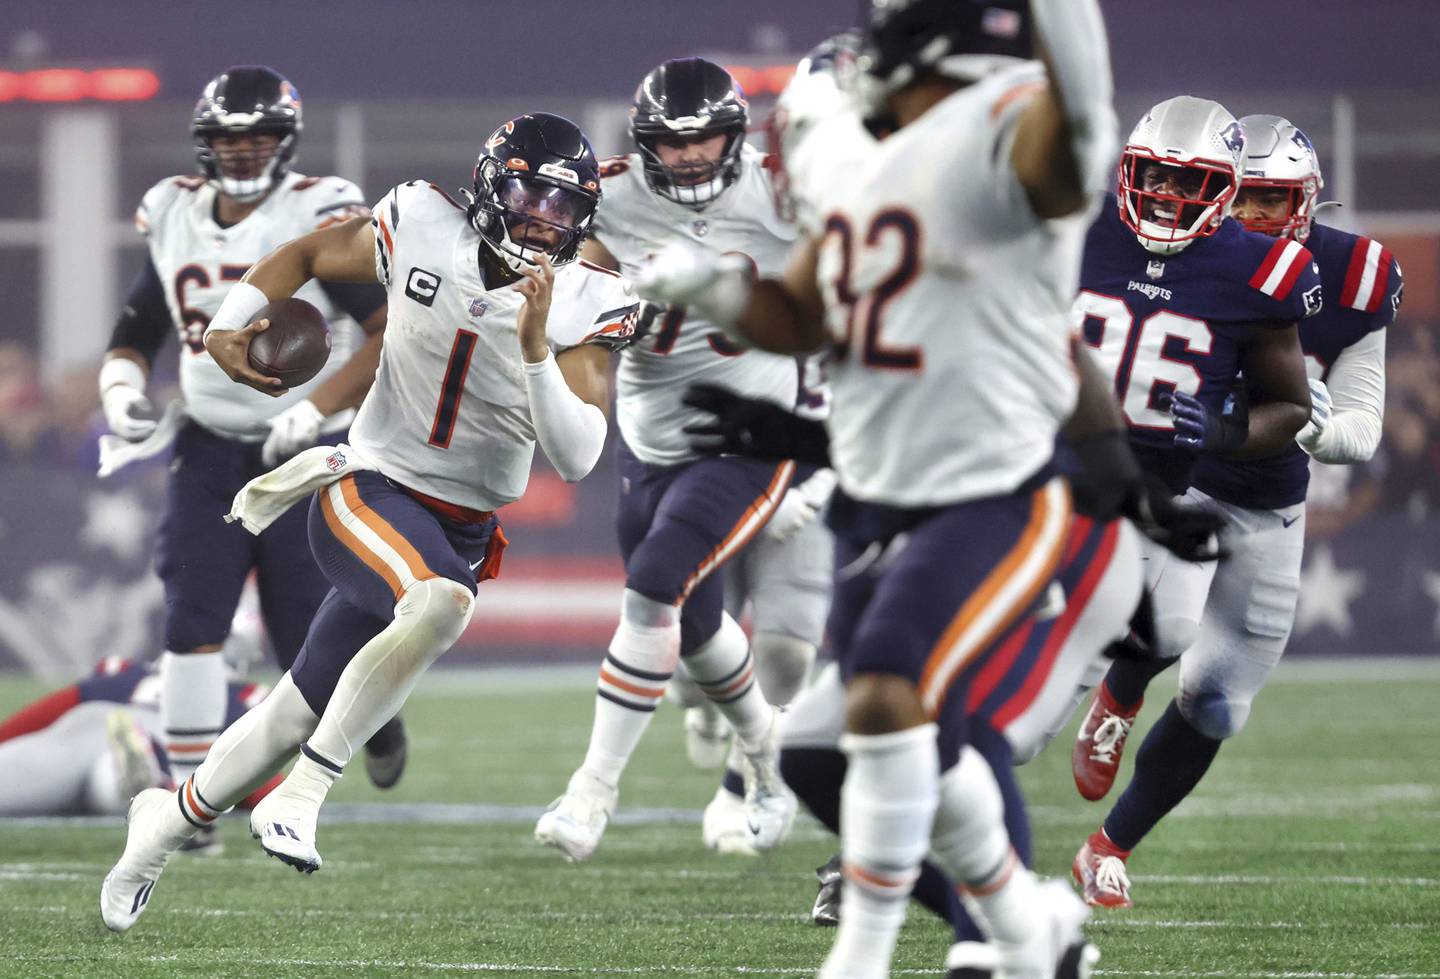 Bears quarterback Justin Fields (1) breaks free for a first down on third-and-15 in the second quarter against the Patriots on Monday, Oct. 24, 2022, at Gillette Stadium in Foxborough, Mass.